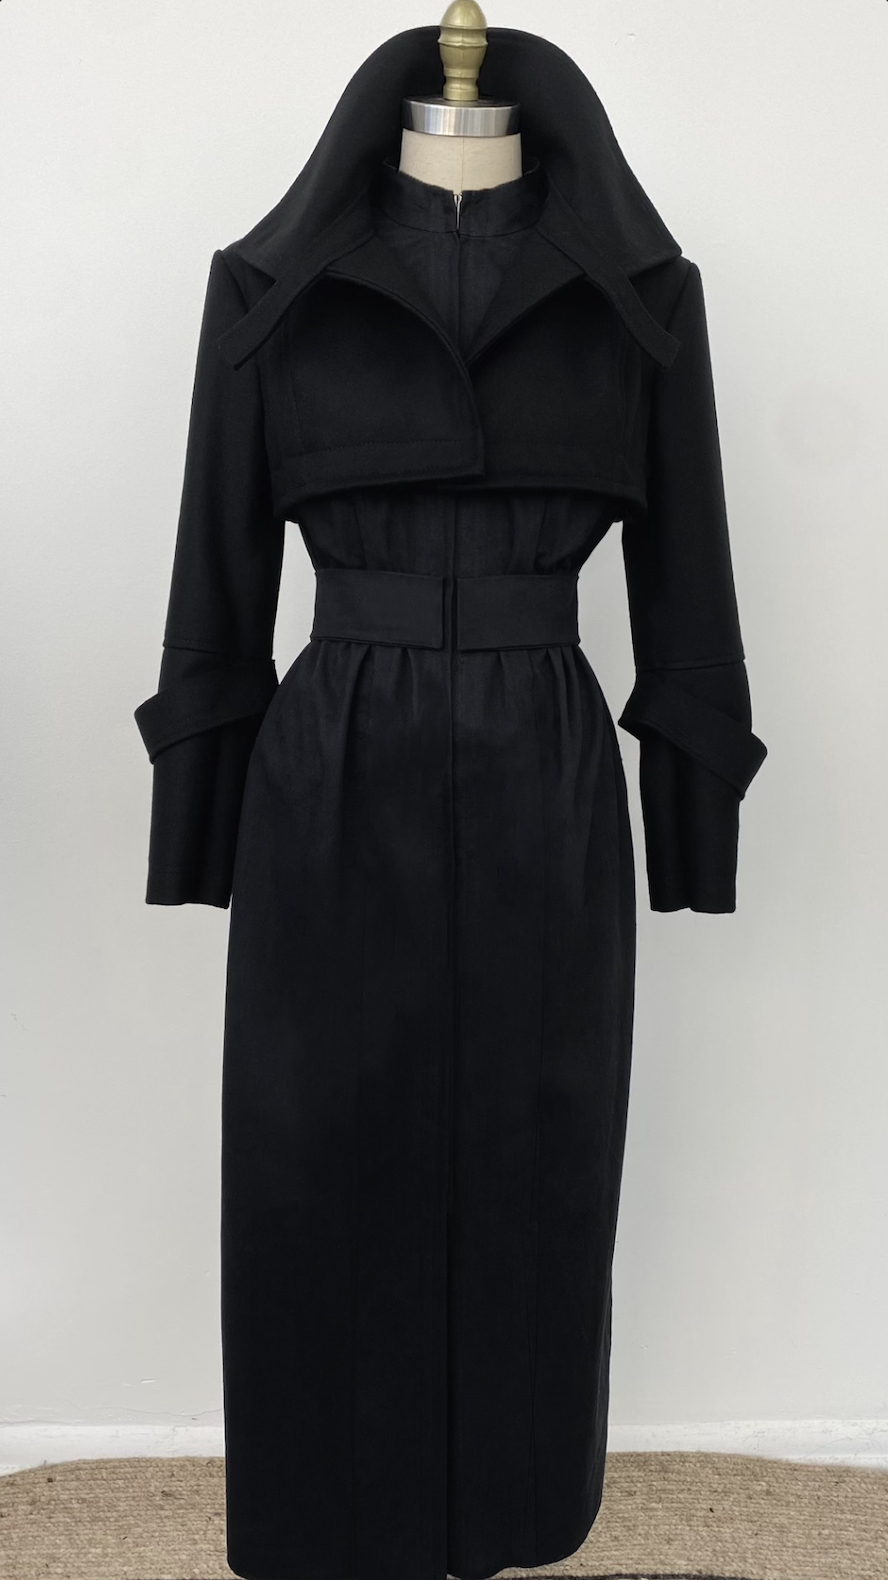 A black trench coat with a high collar